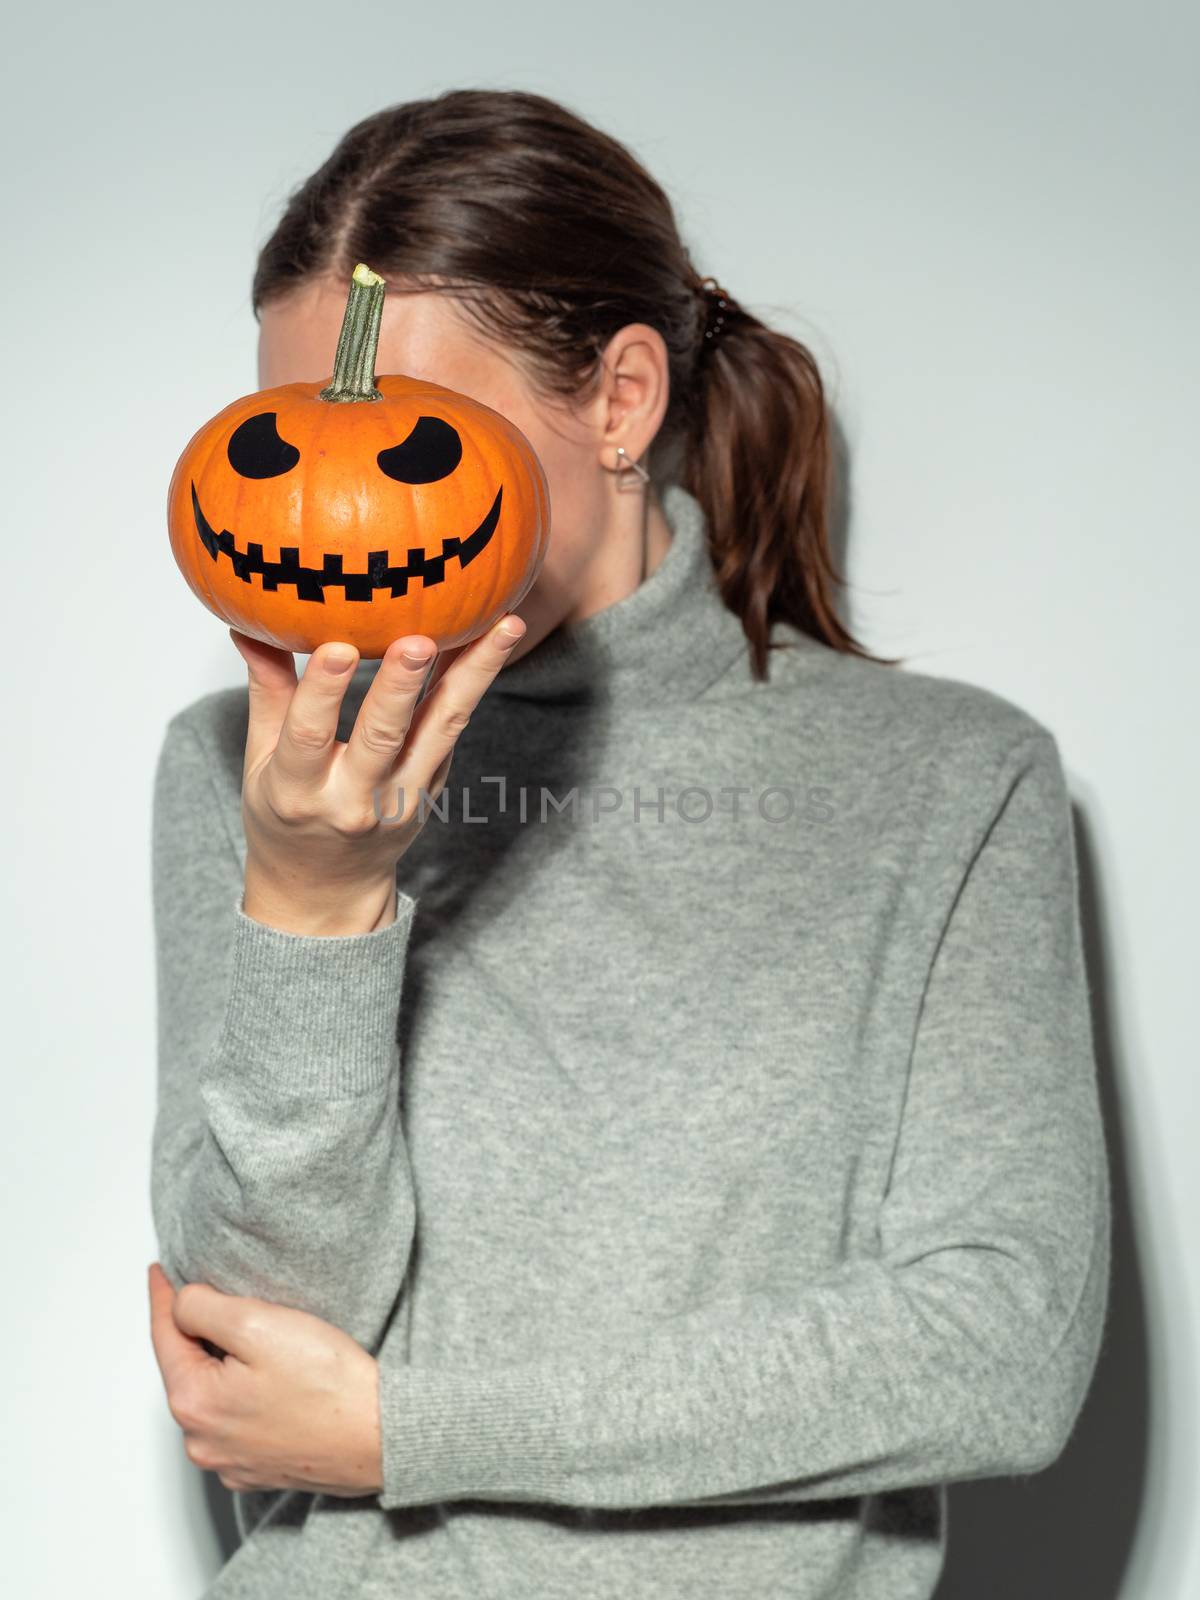 Crop unrecognizable woman holding halloween scary face bright orange pumpkin in front of her face. Young woman in gray cashemere sweater hides her face behind jack-o-lantern pumpkin. Snapshot style